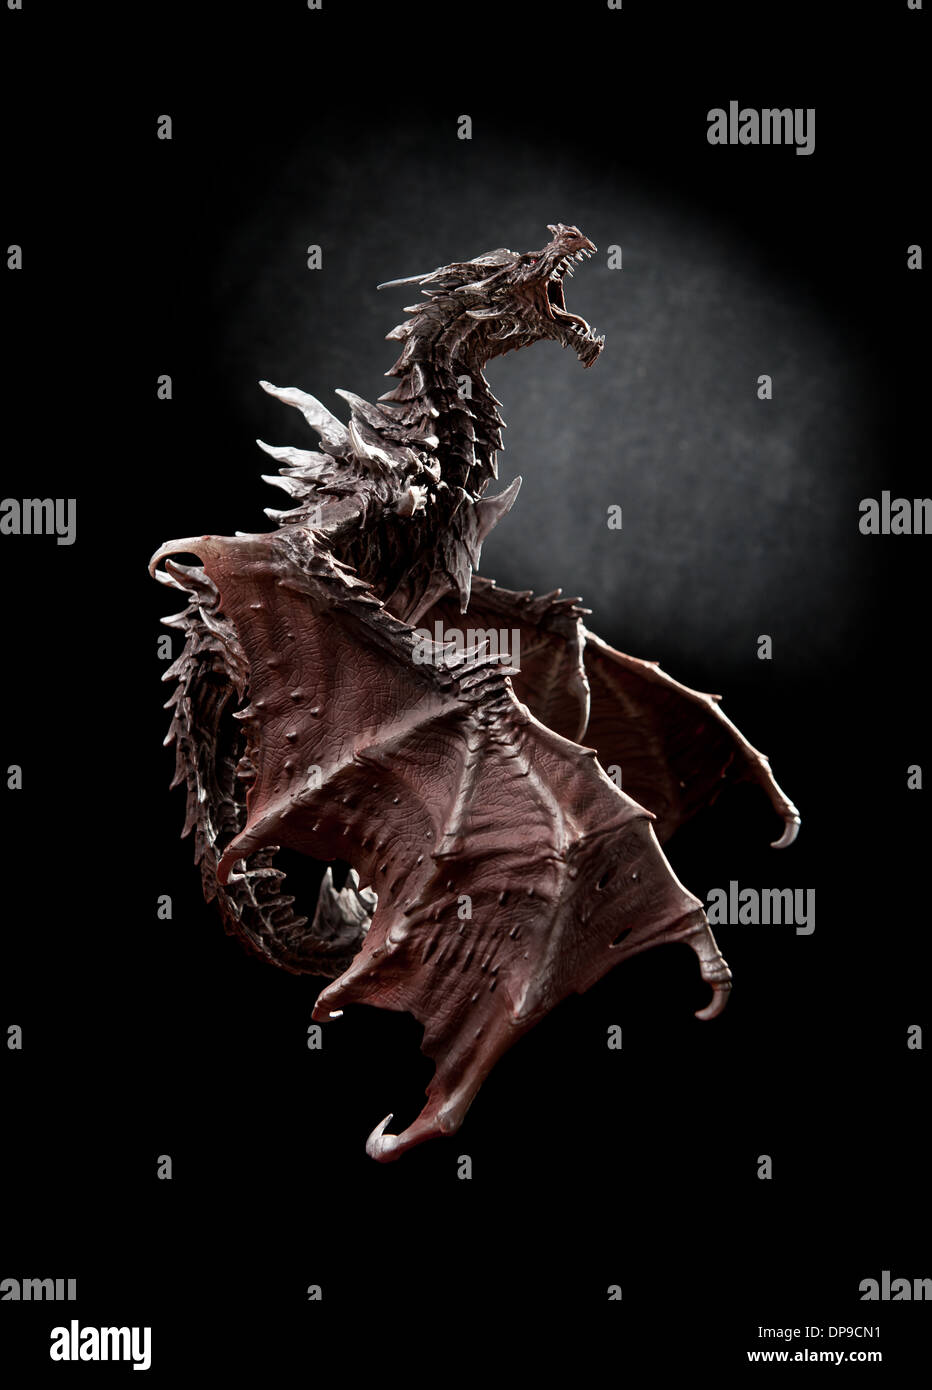 One Alduin dragon from Skyrim game Stock Photo